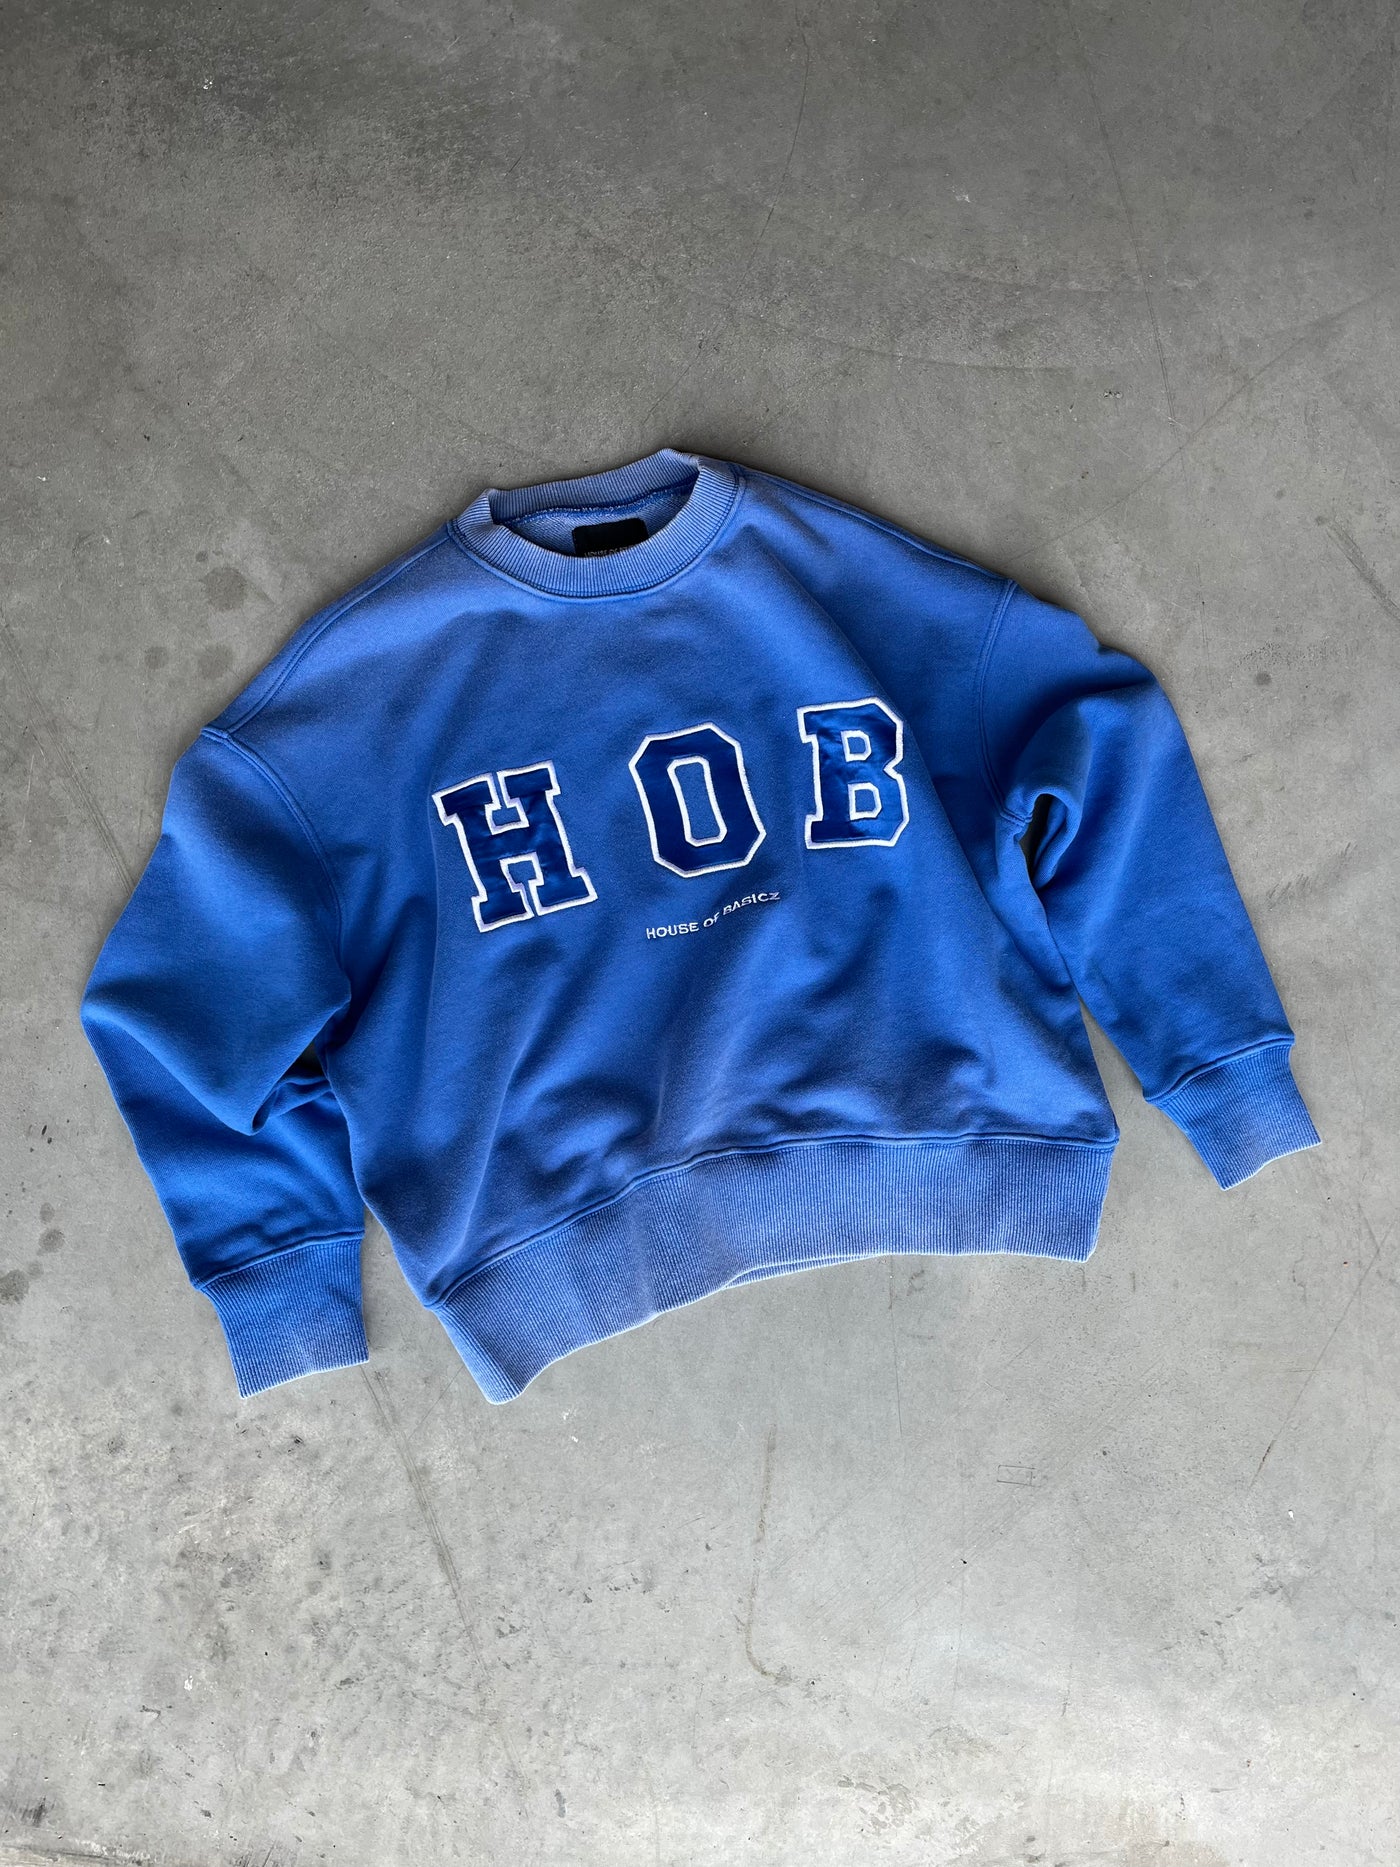 The Sweater Blue Washed